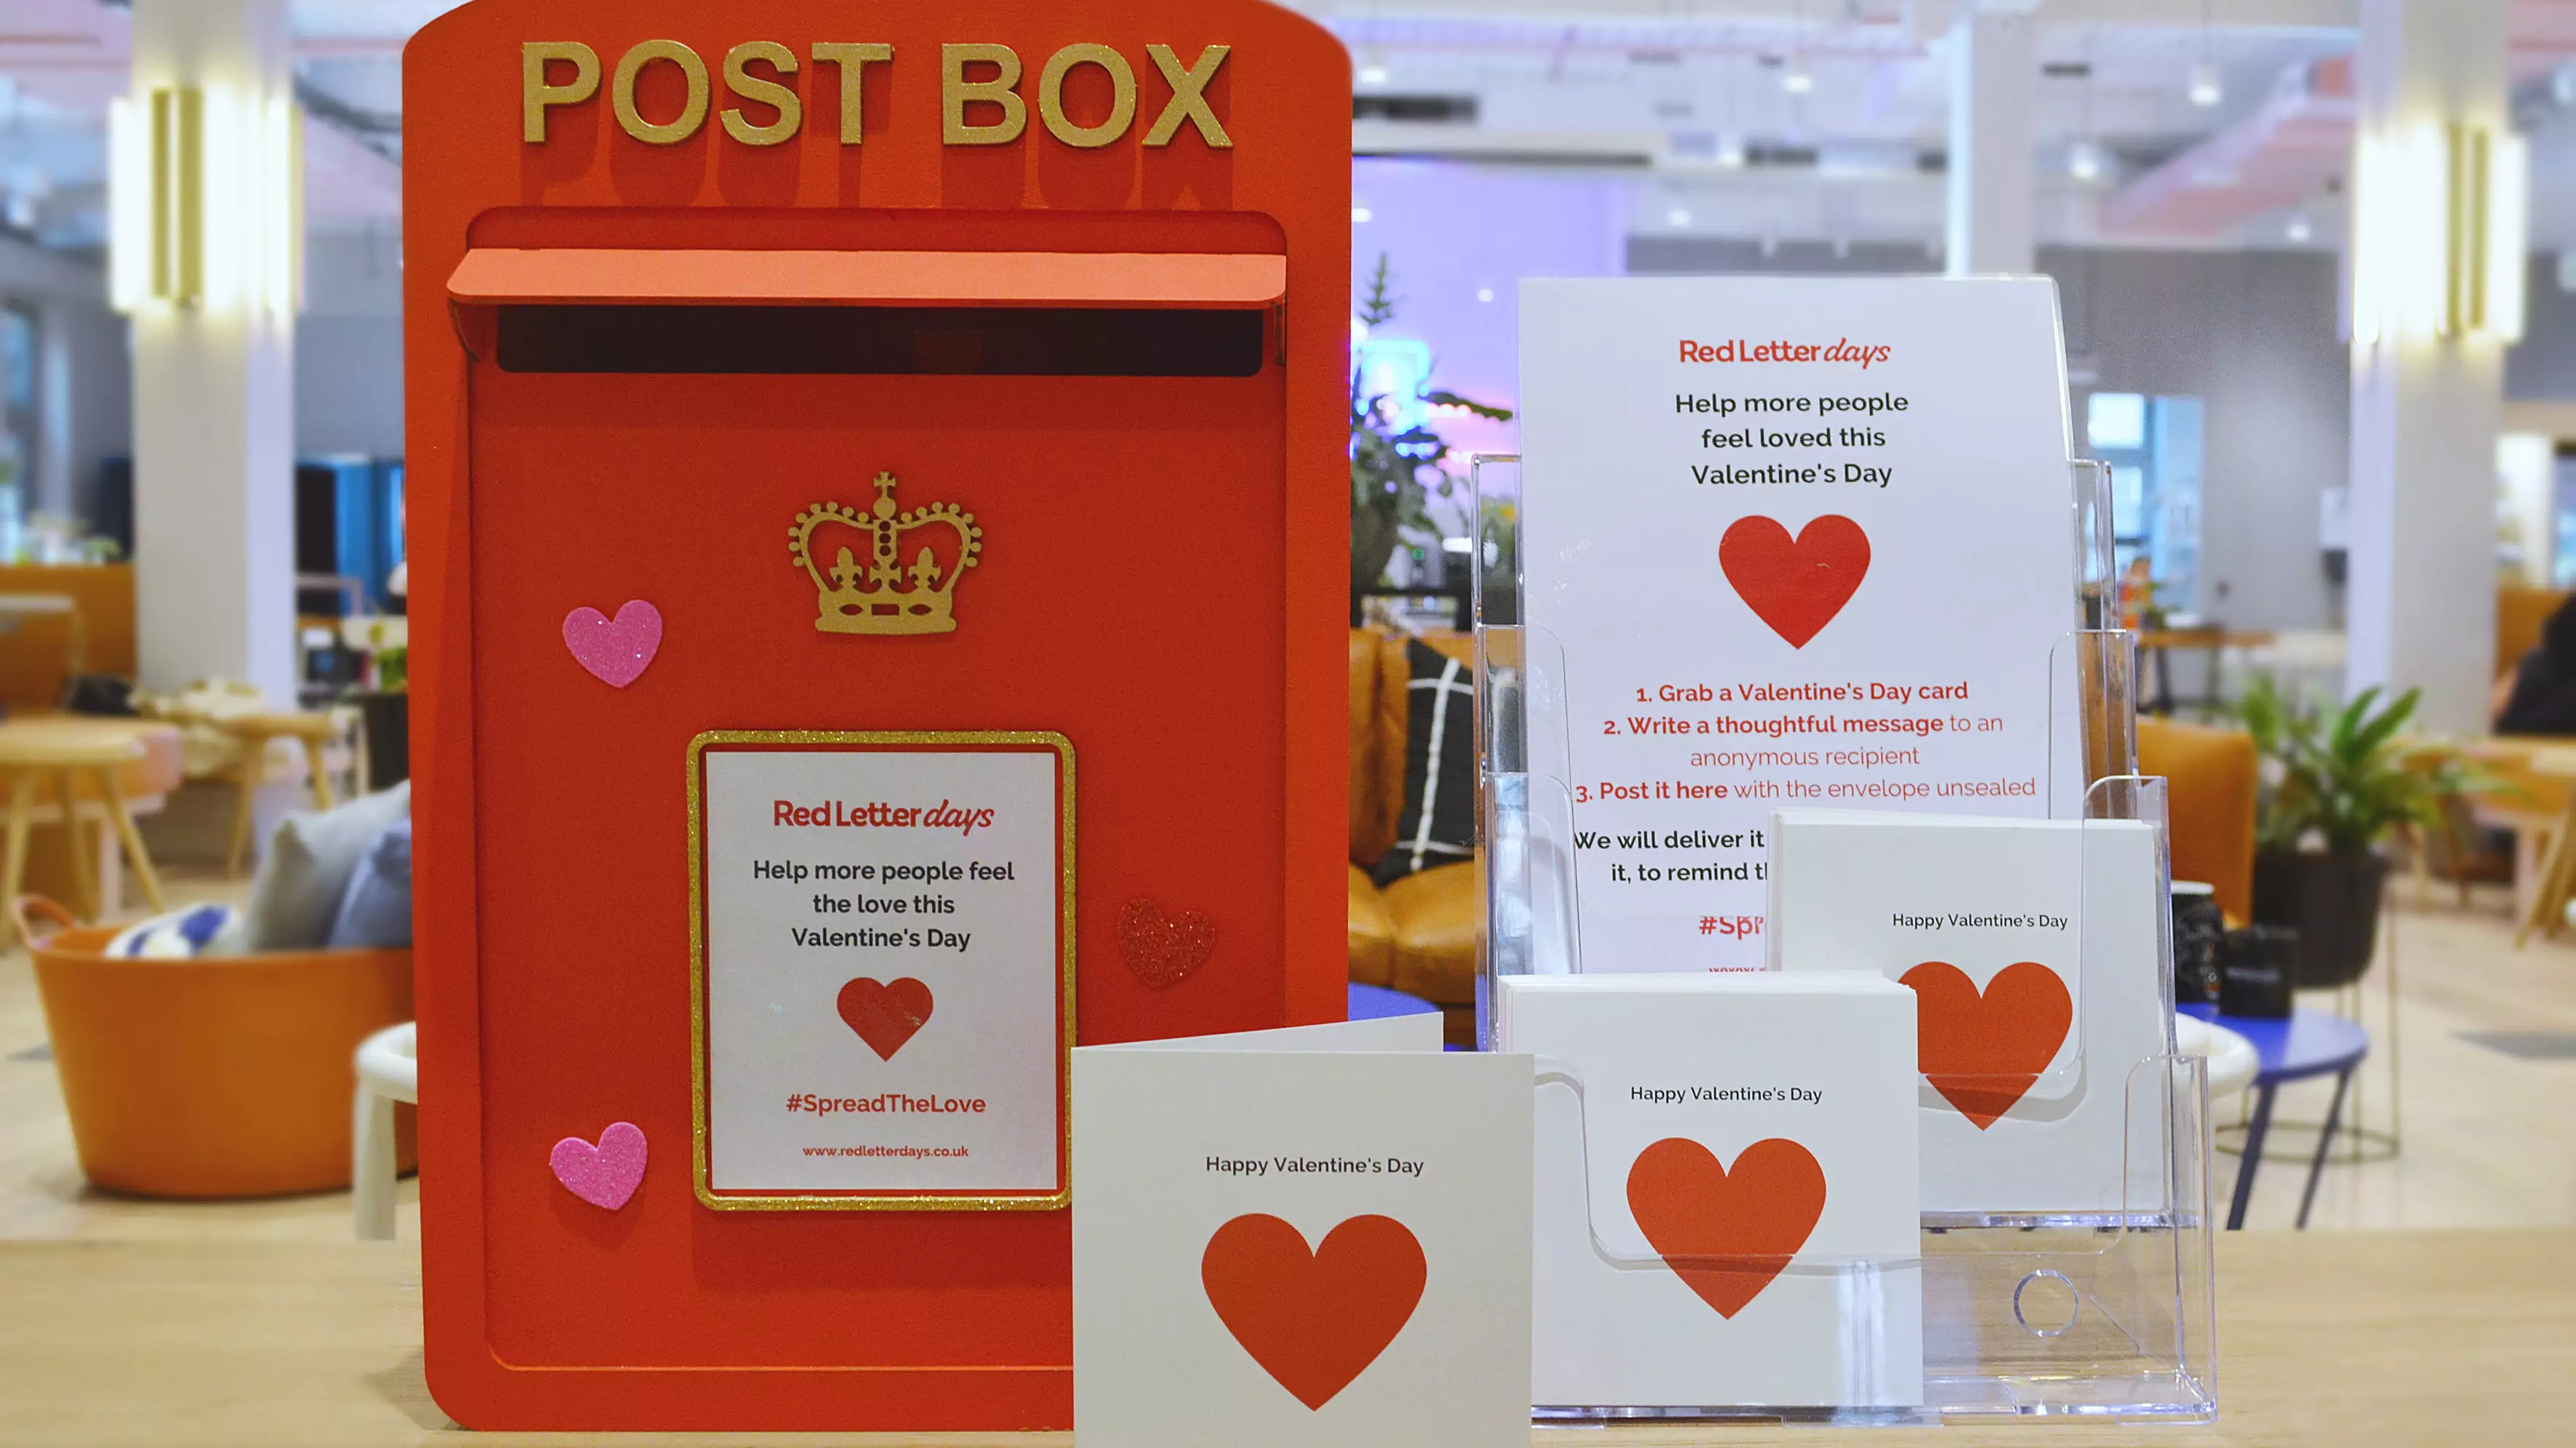 Letterboxes Are Appearing So You Can Send Valentine's Cards To Lonely People